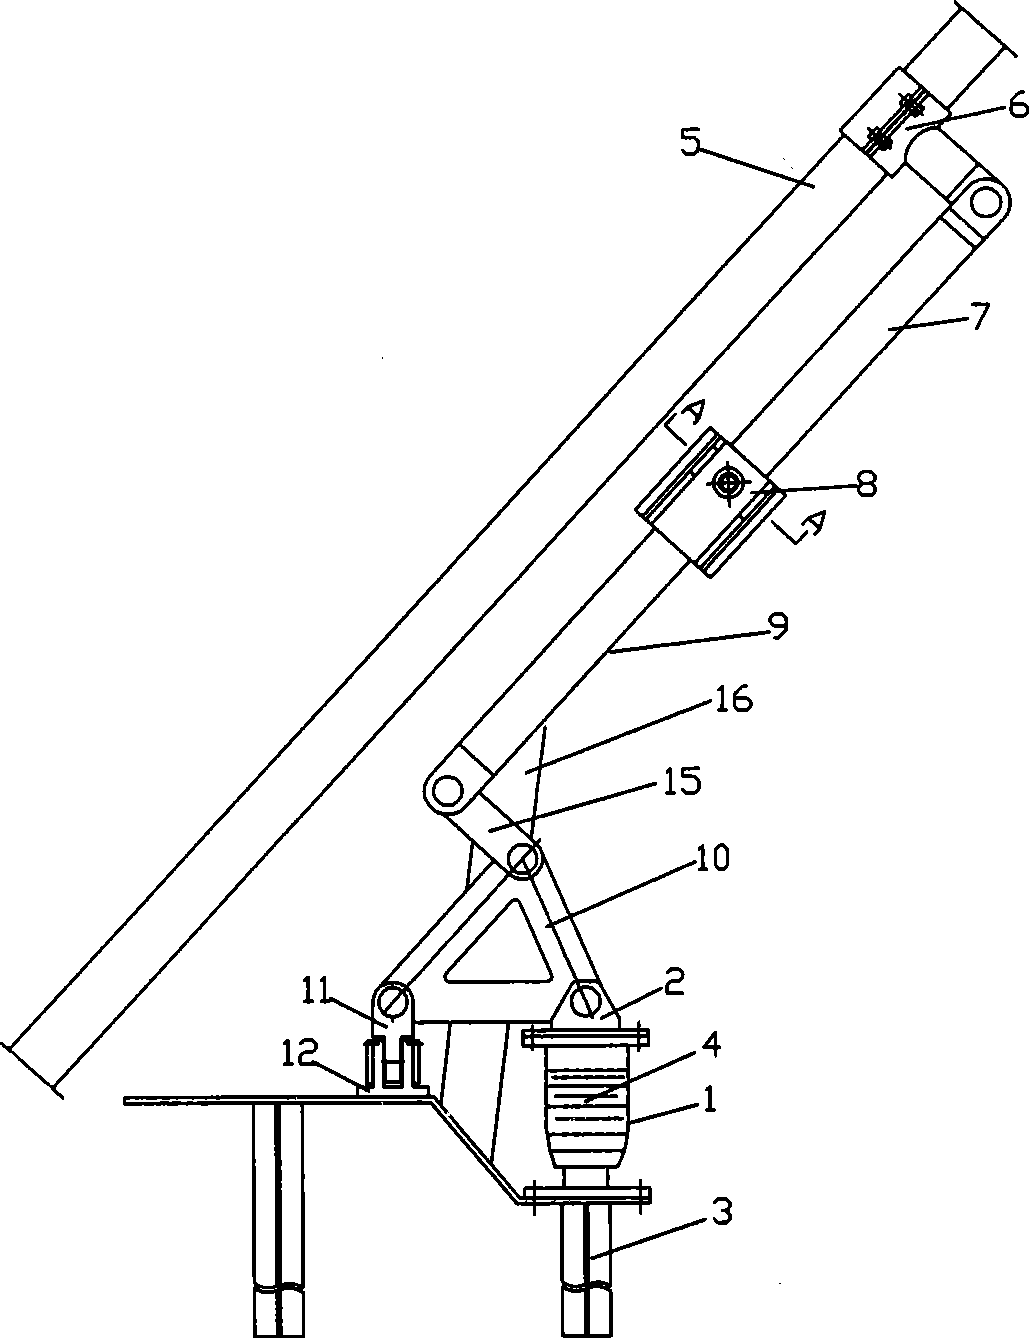 Stay-cable sticky shearing type damper with steering mechanism